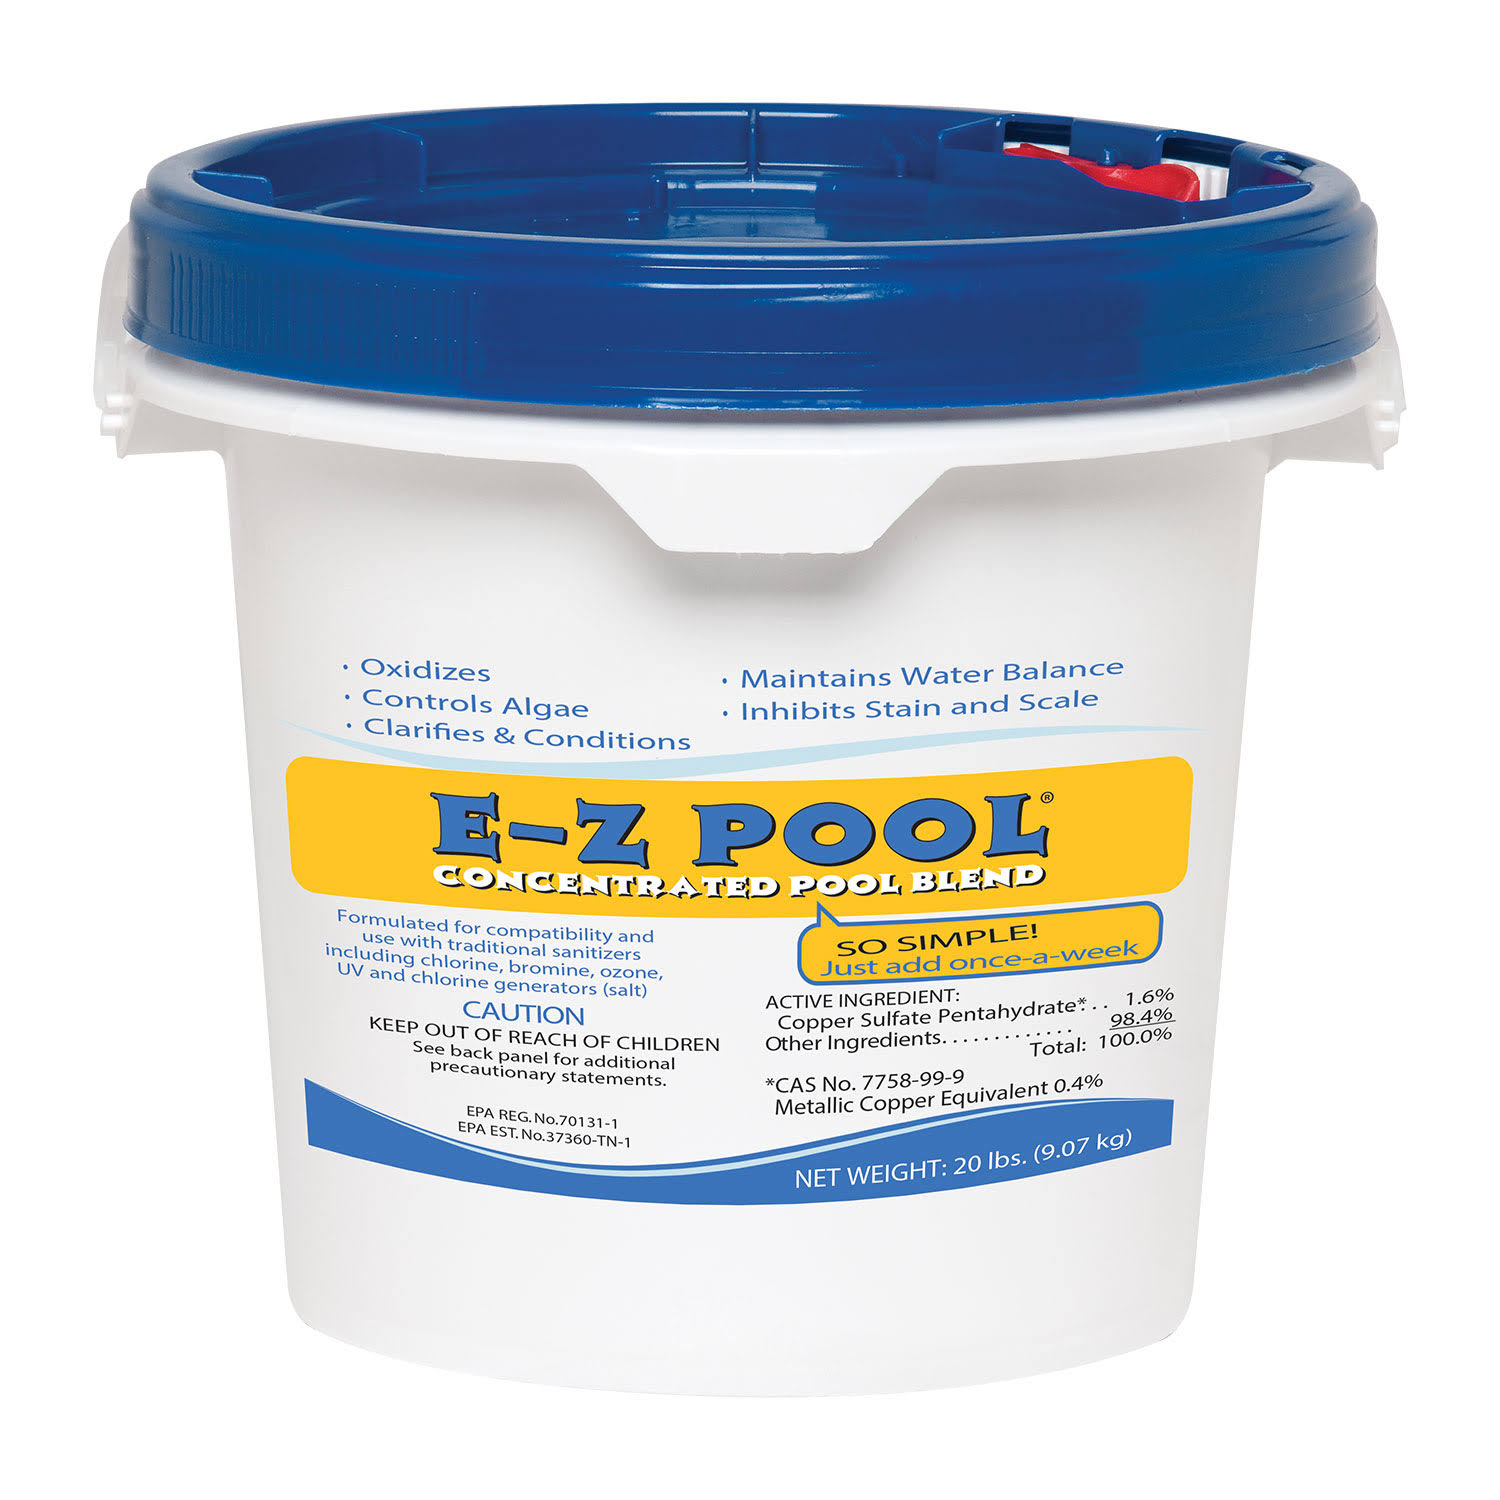 Ez Pool Concentrated Pool Blend Water Care - Soft and Simple, 20lbs